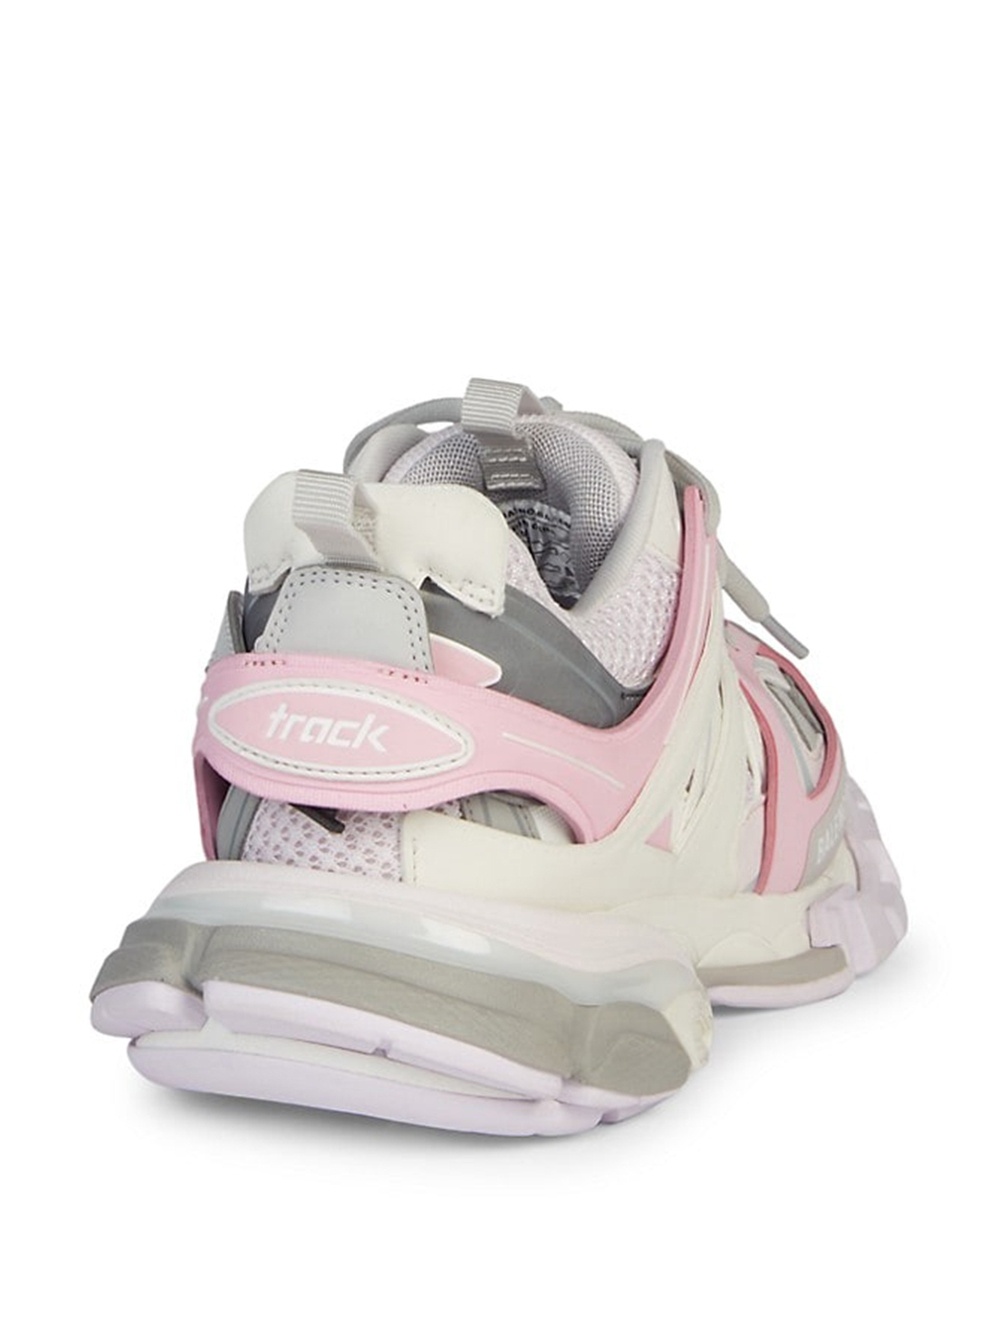 LED Track Sneaker Grey Pink and White - 3